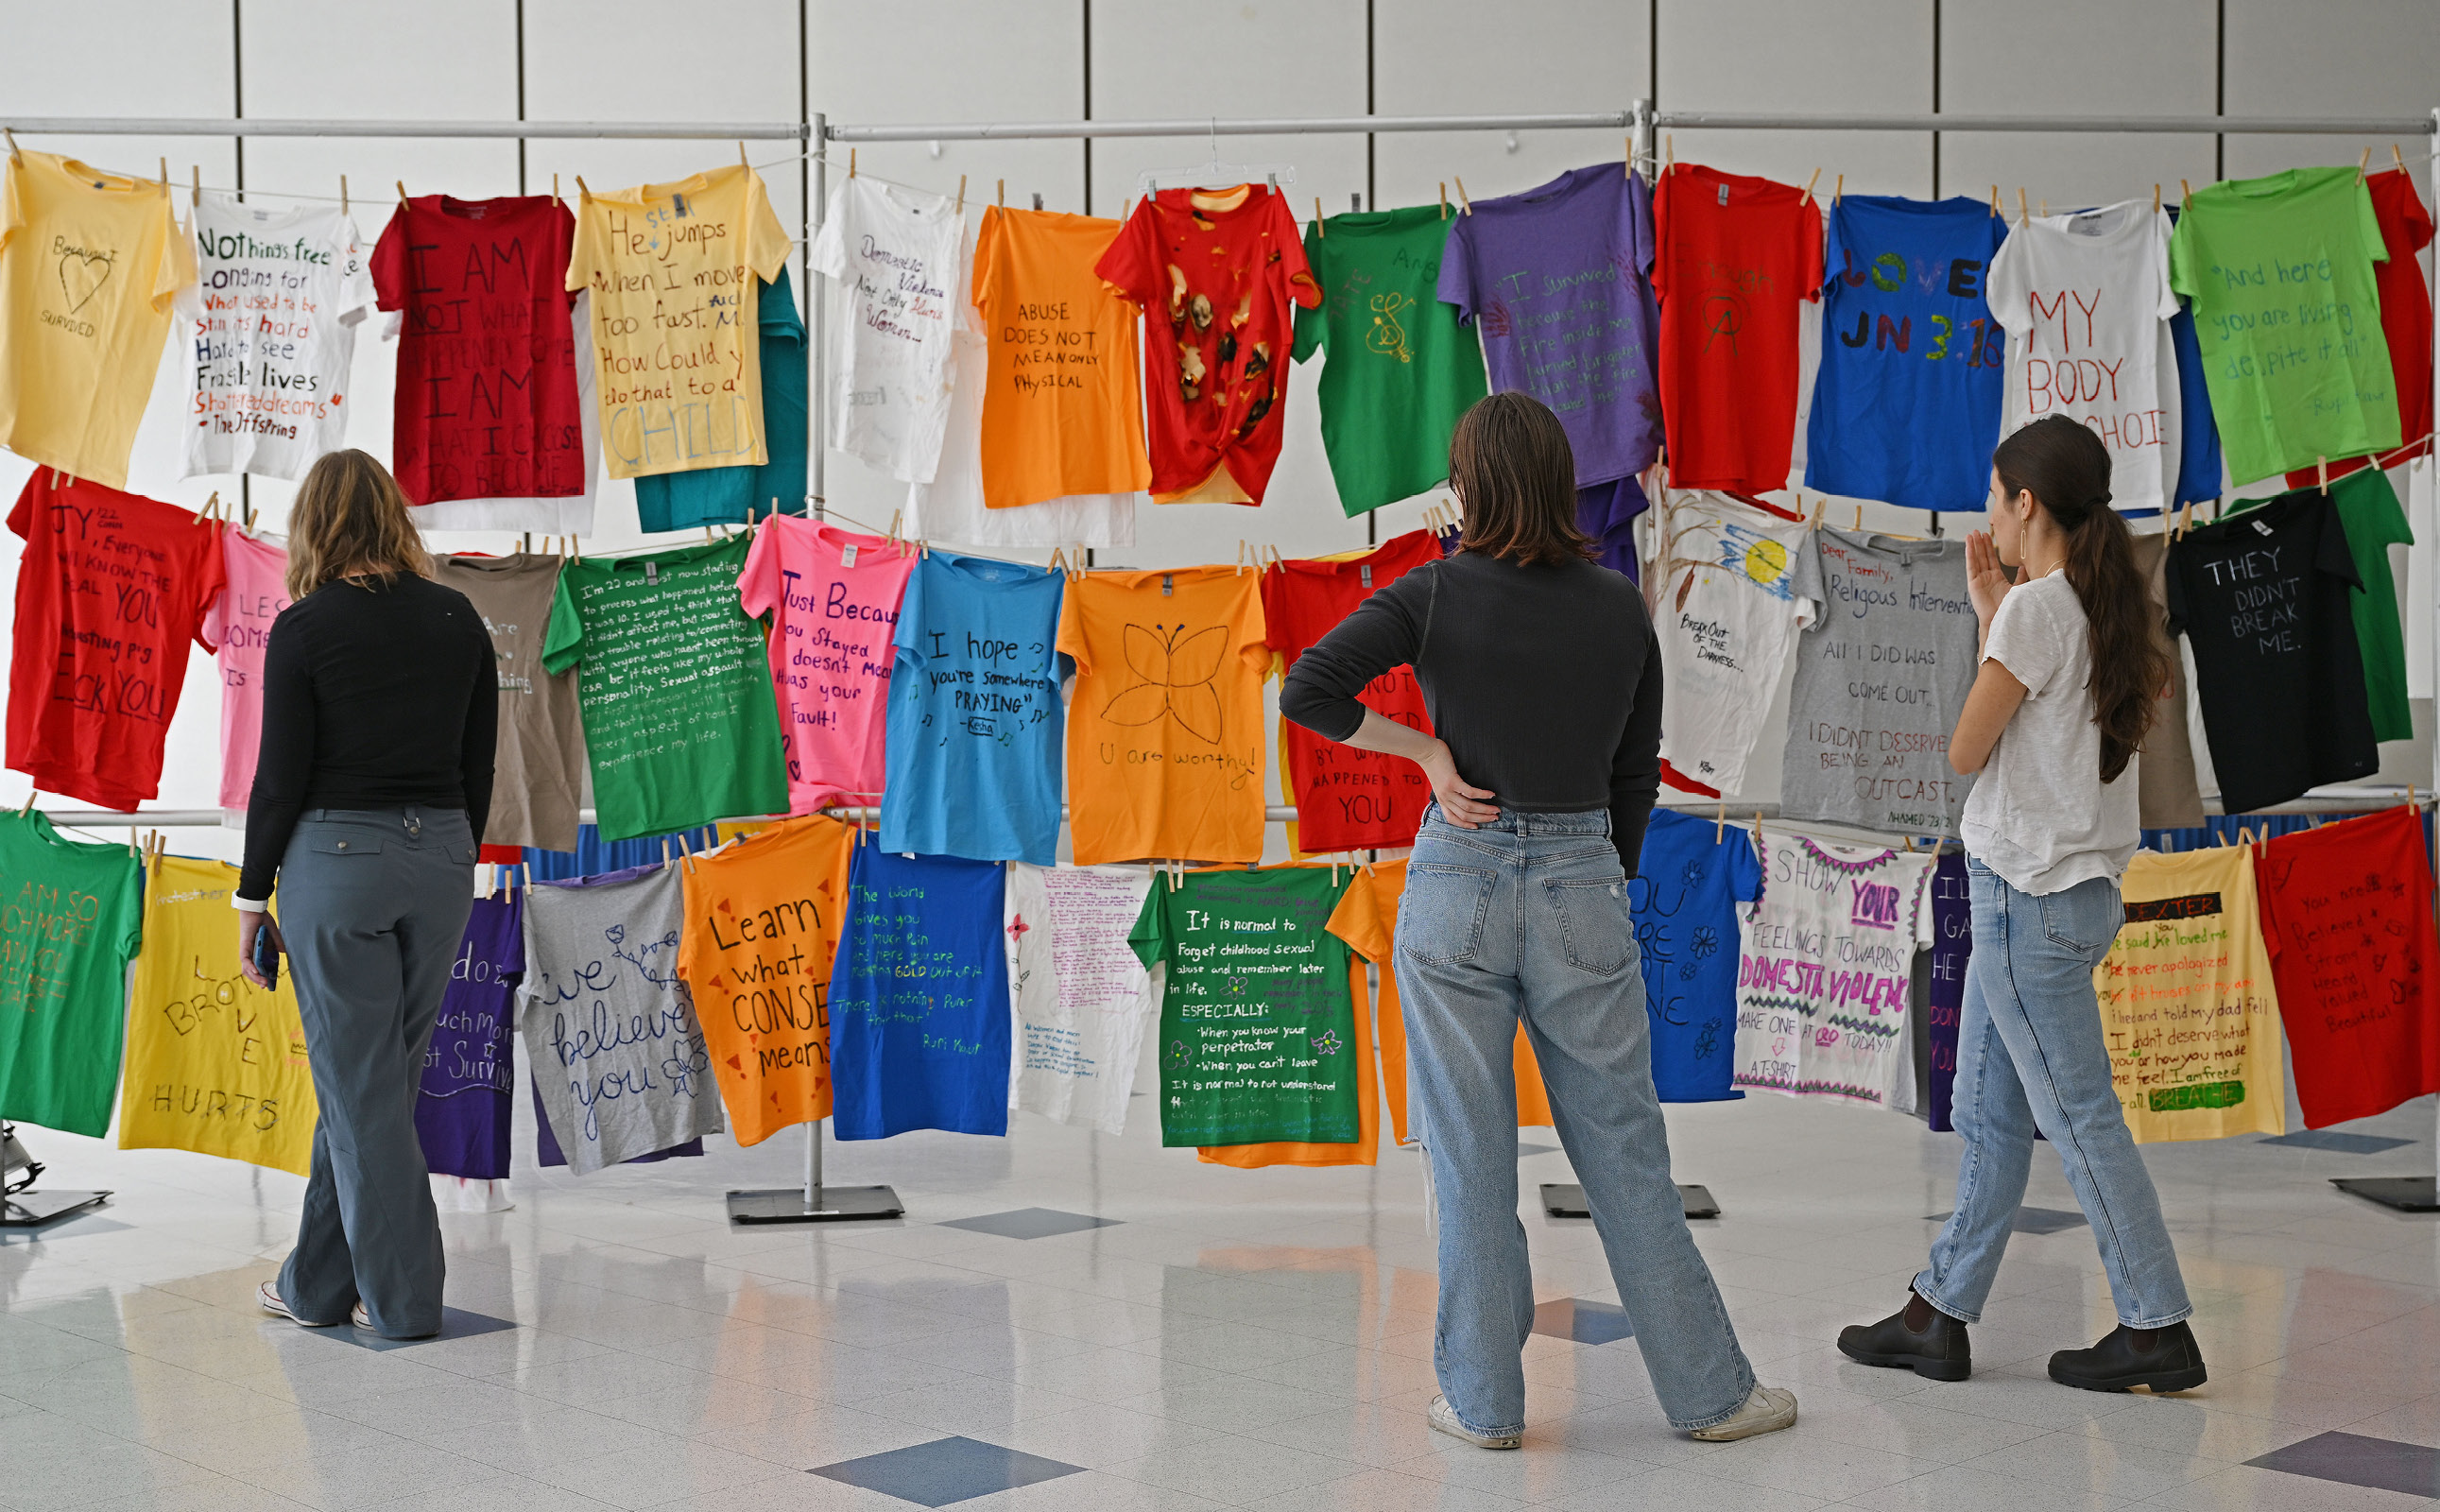 Students view handwritten shirts at the Clothesline Project in the 1962 Room.